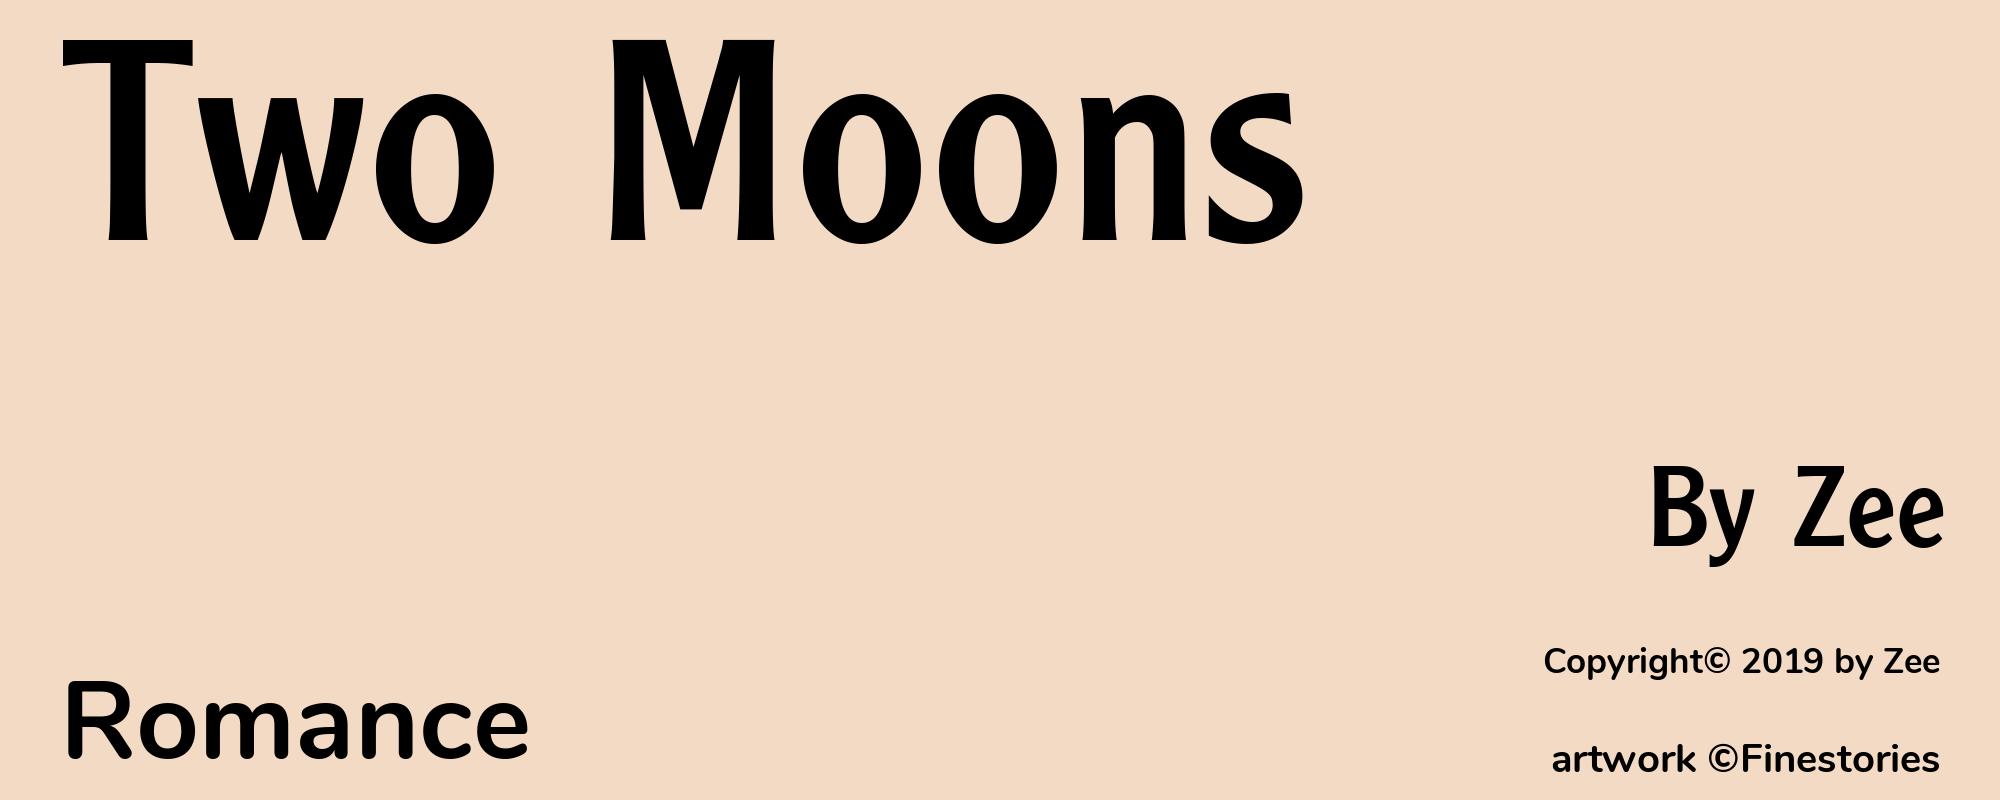 Two Moons - Cover